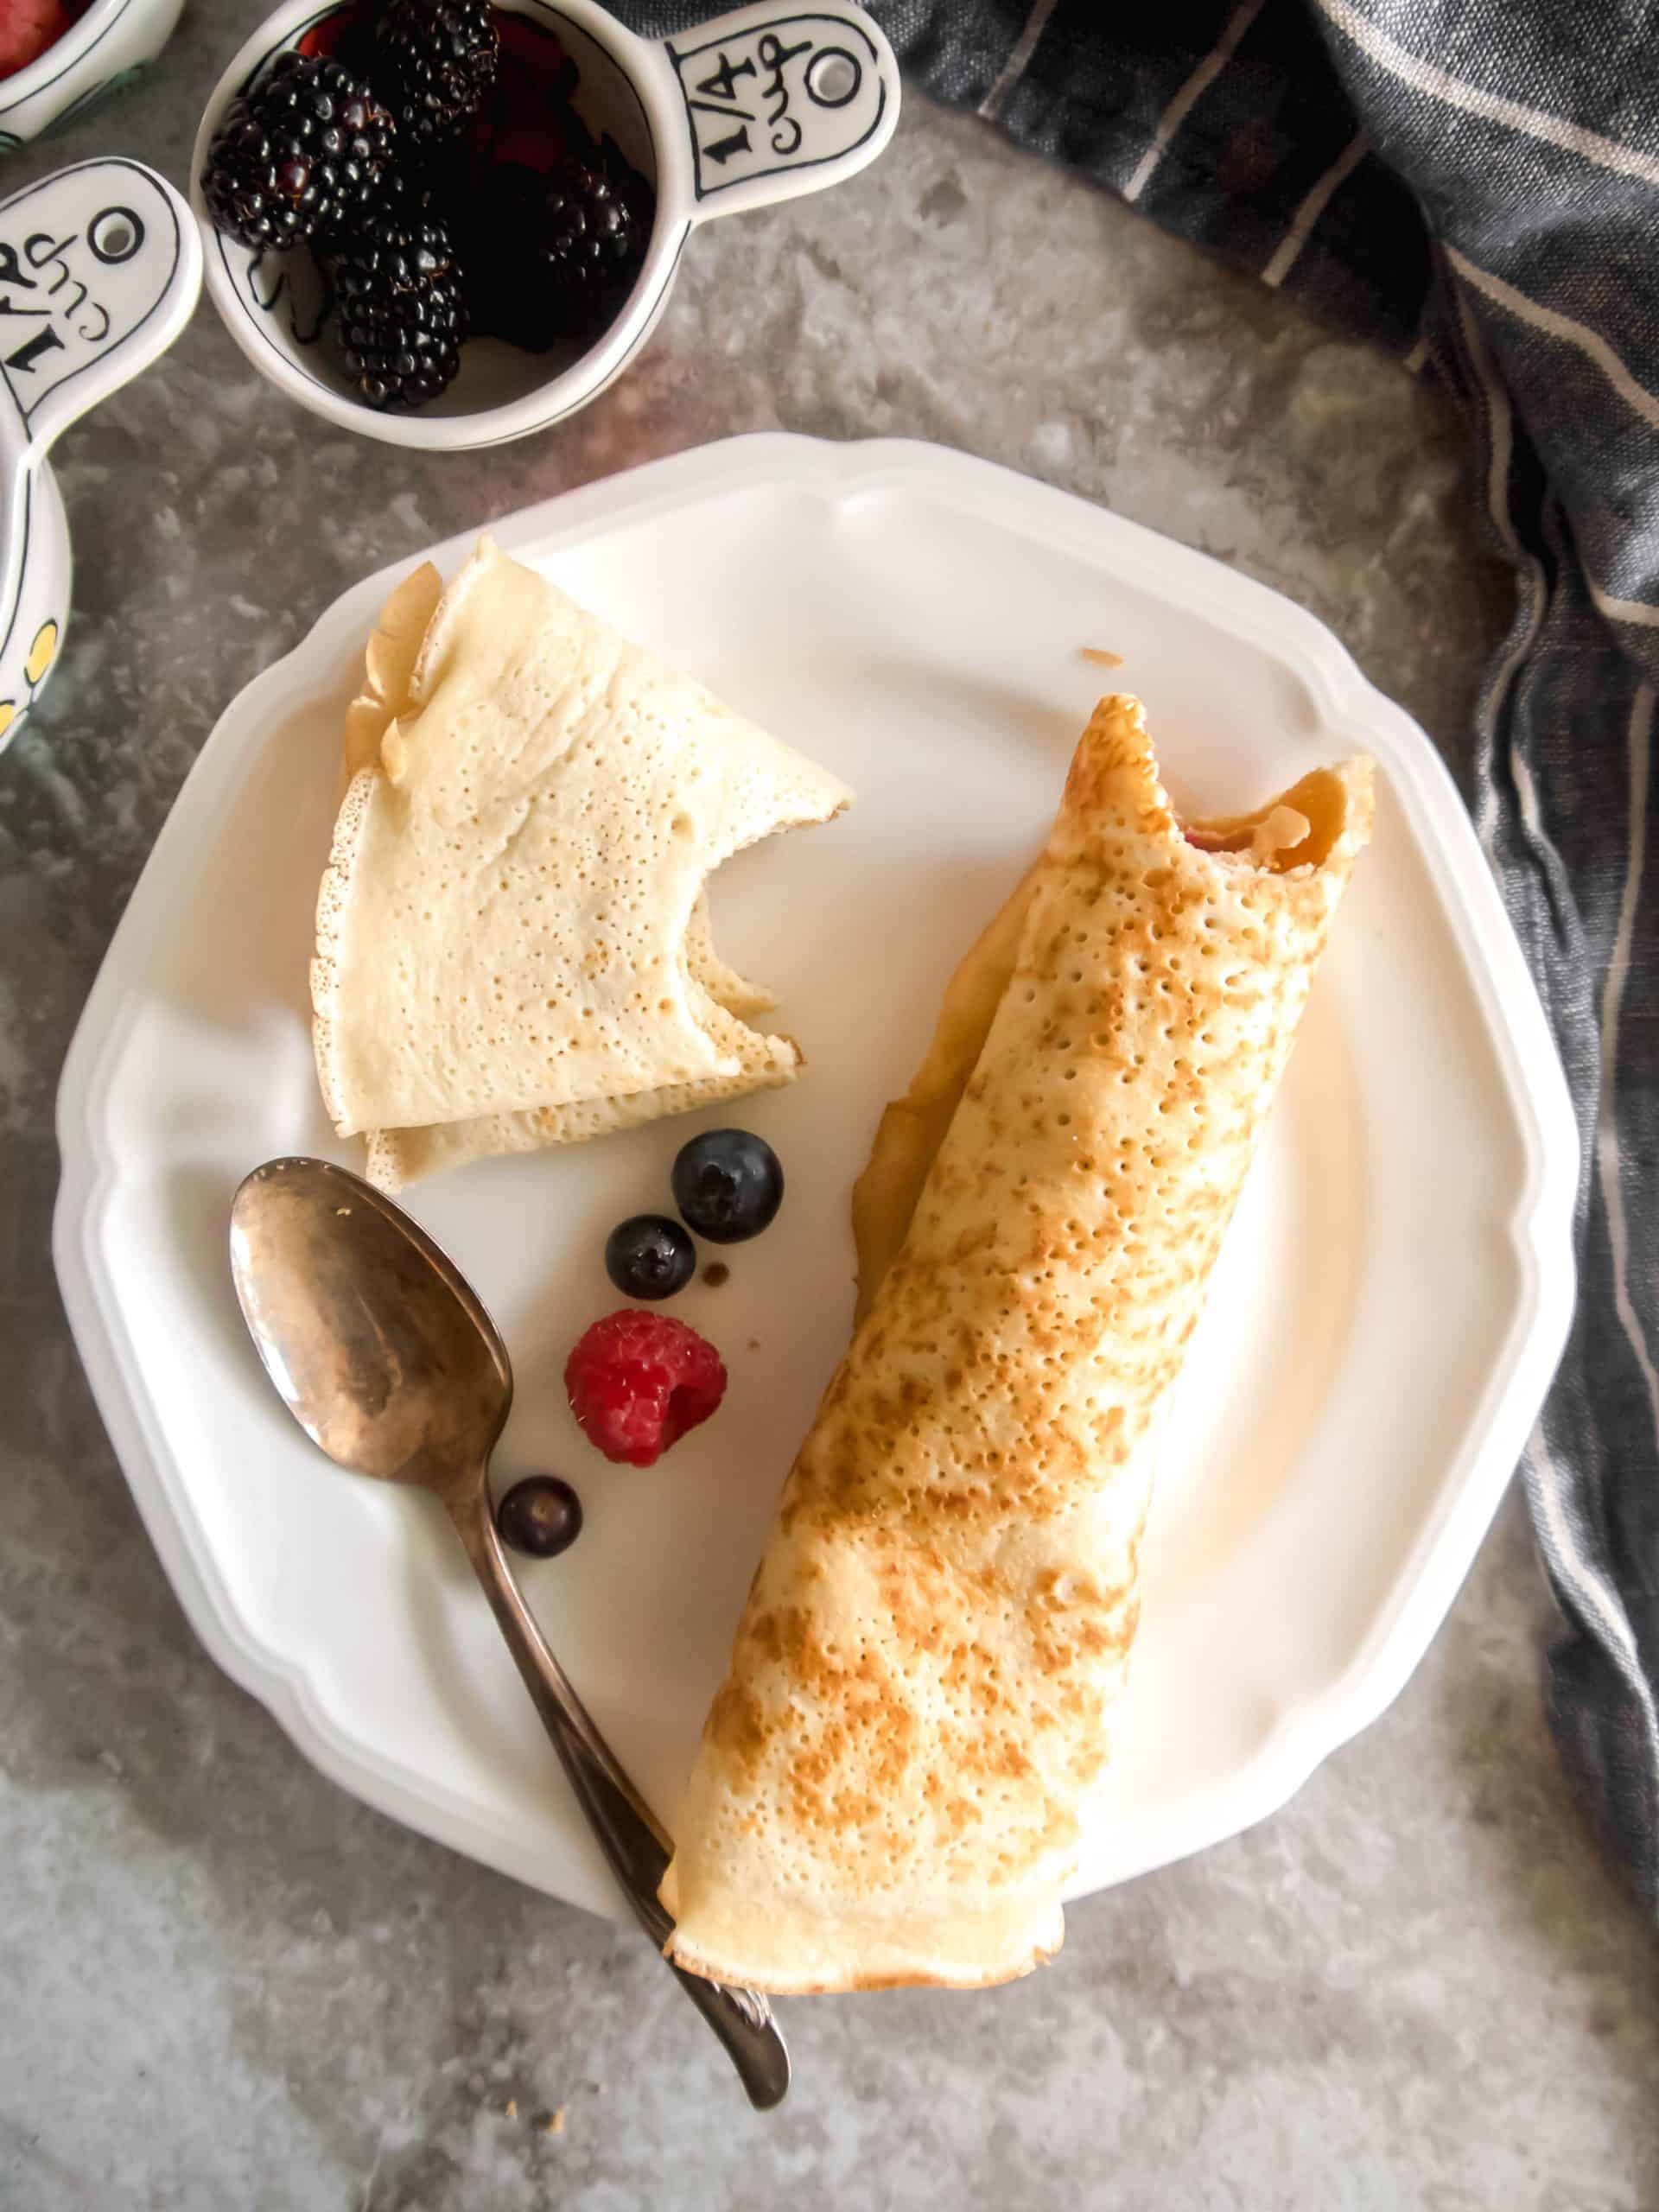 Crepes filled and ready to eat.